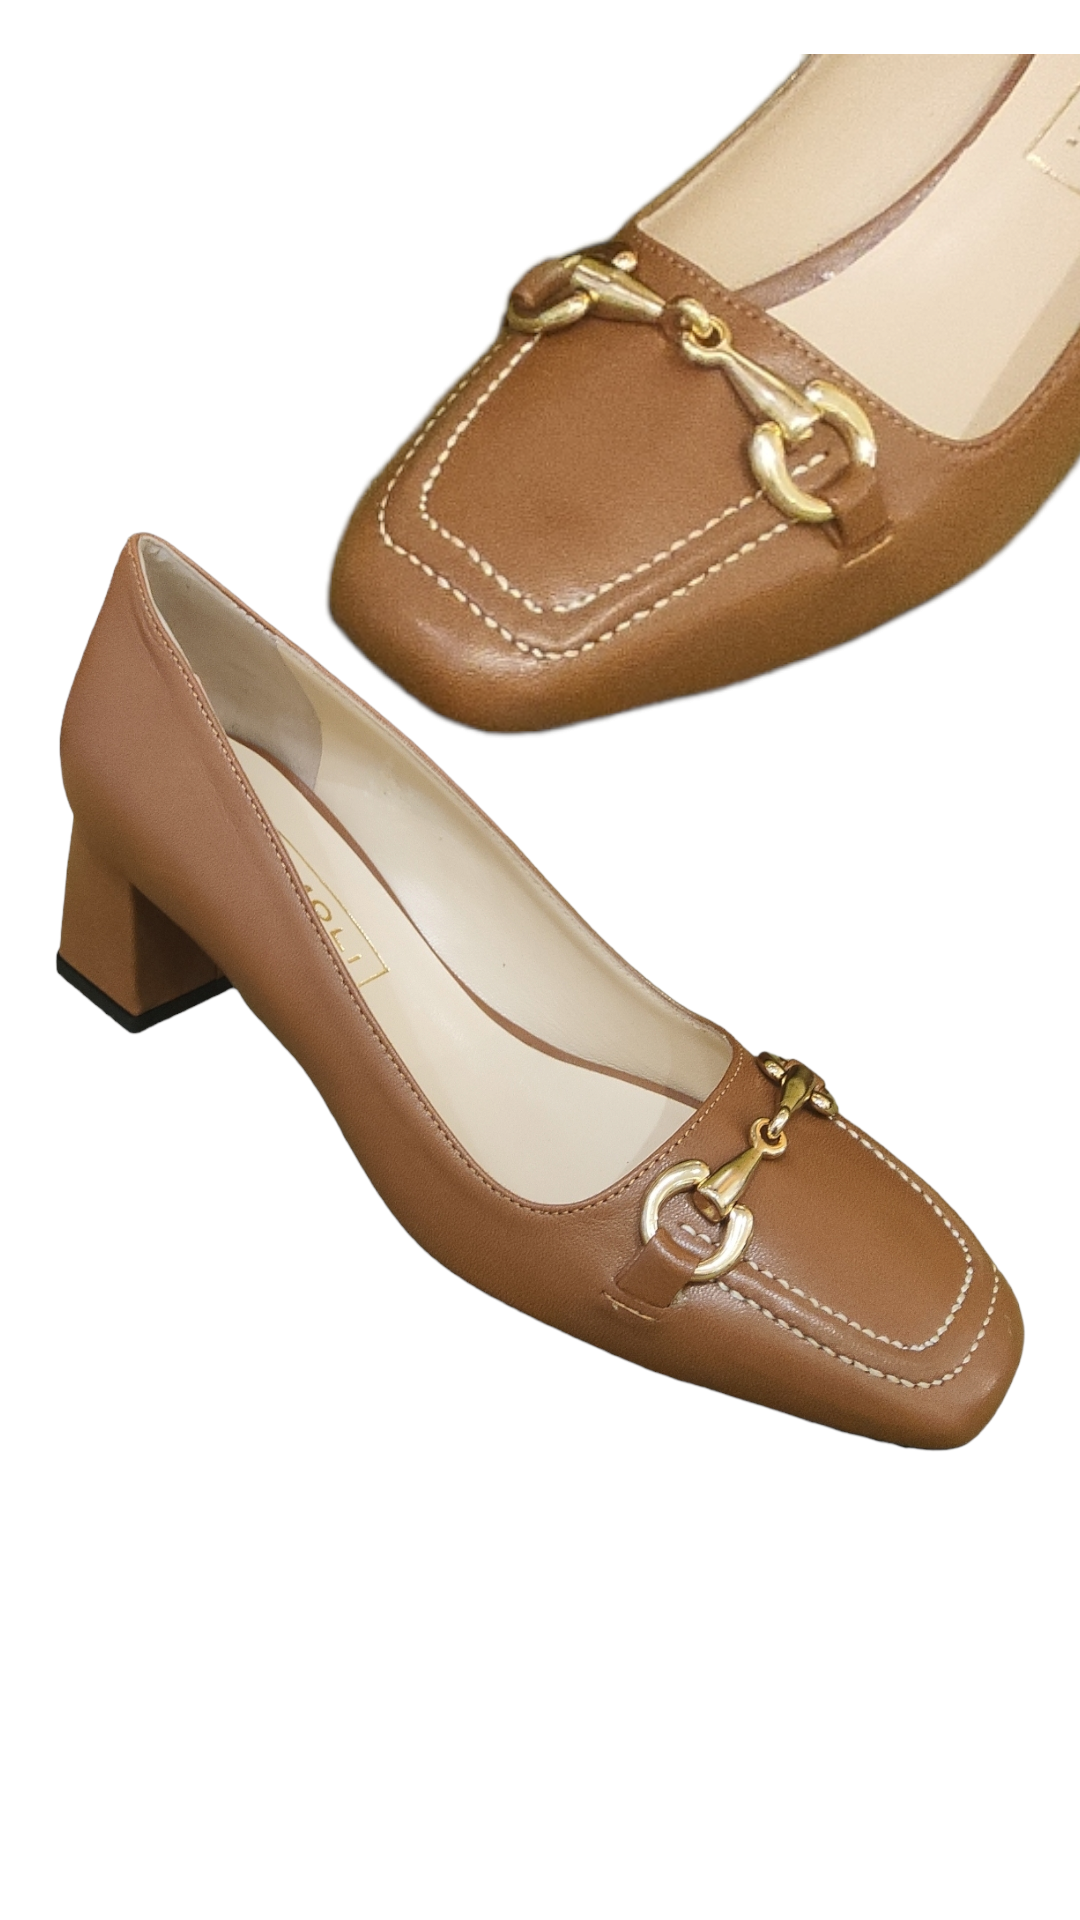 Tan leather court shoe